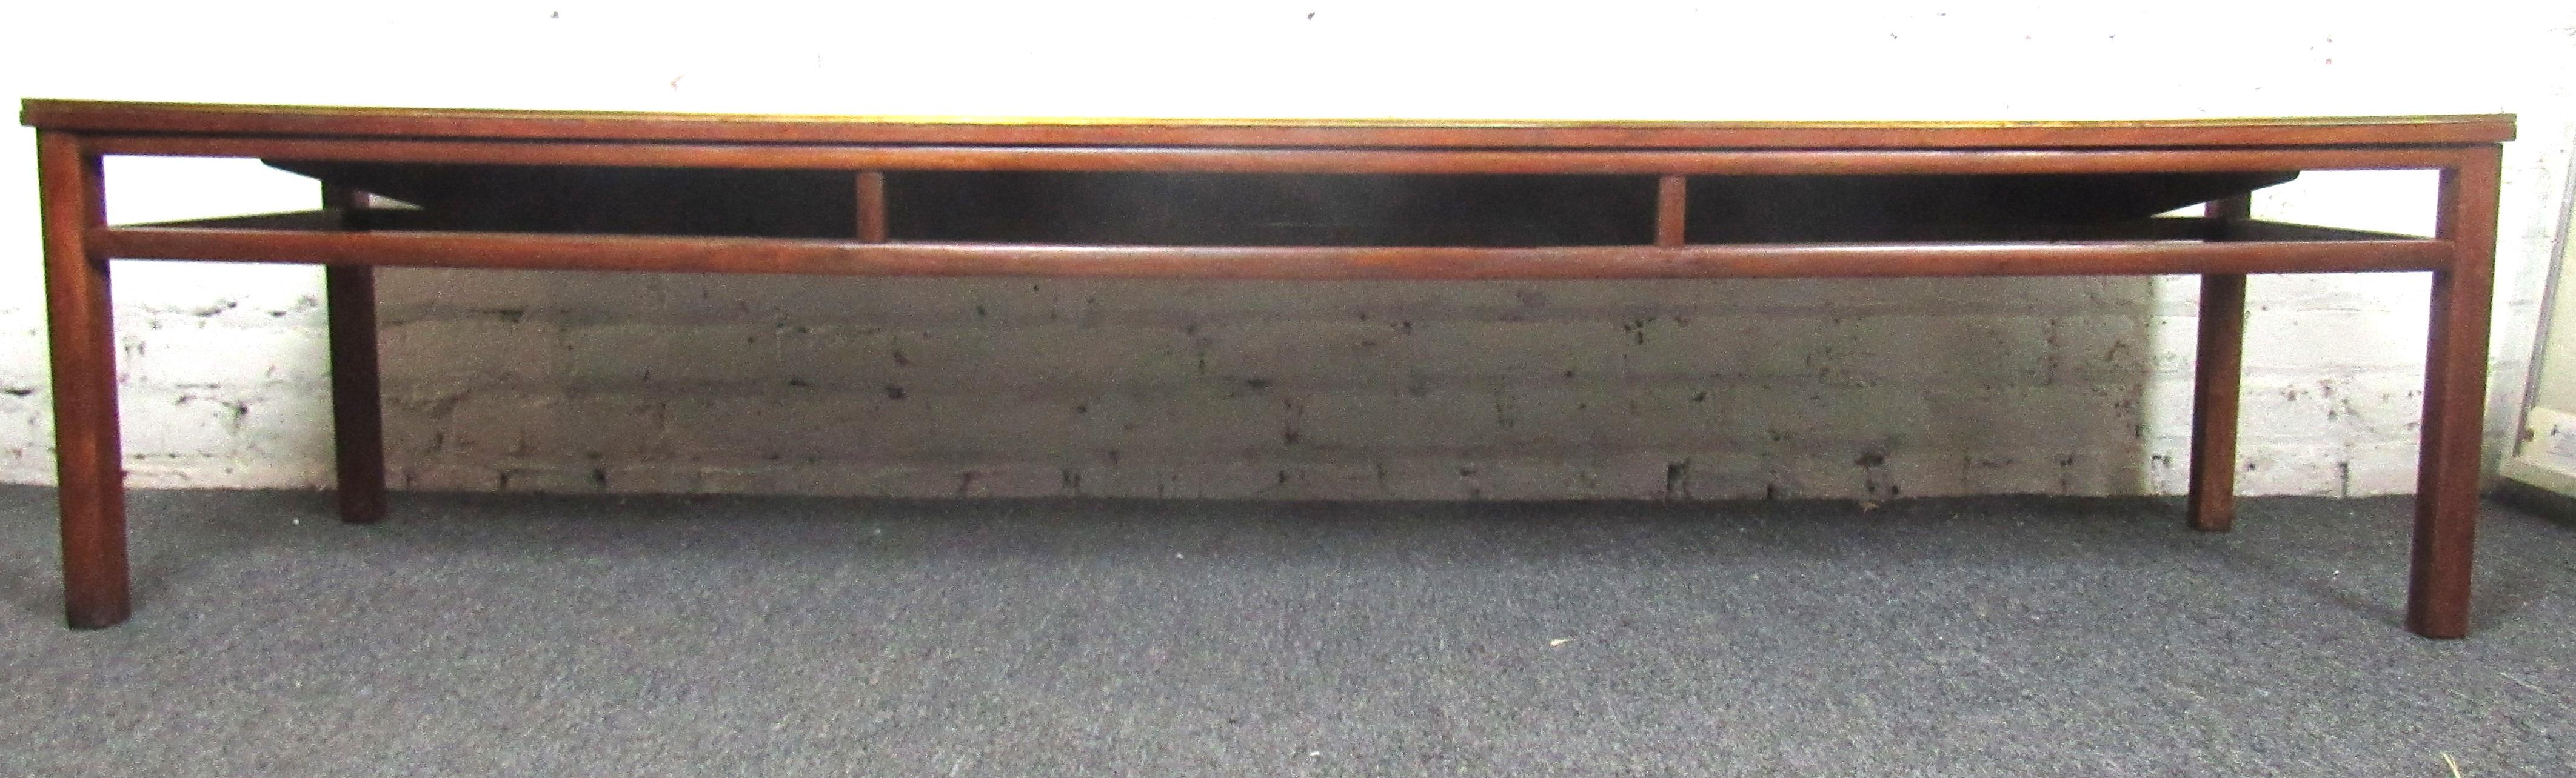 Beautiful vintage modern walnut coffee table/bench with brass trim. This sleek and slender coffee table would make a beautiful addition to any space, and could also double as a bench. Made in Grand Rapids, Michigan by Imperial Furniture